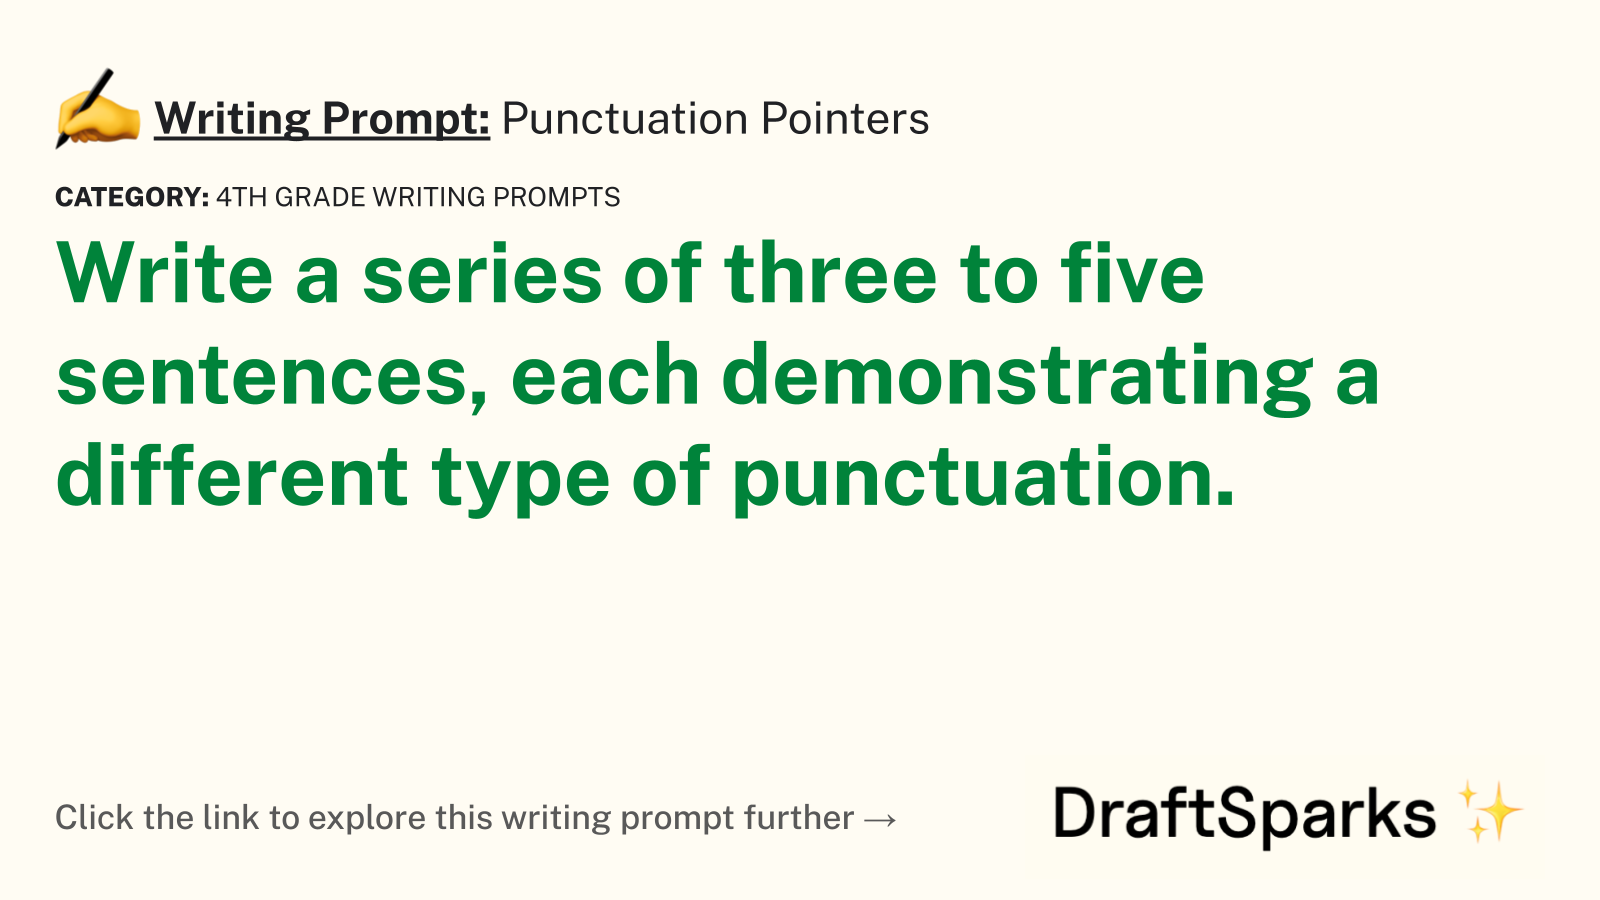 Punctuation Pointers